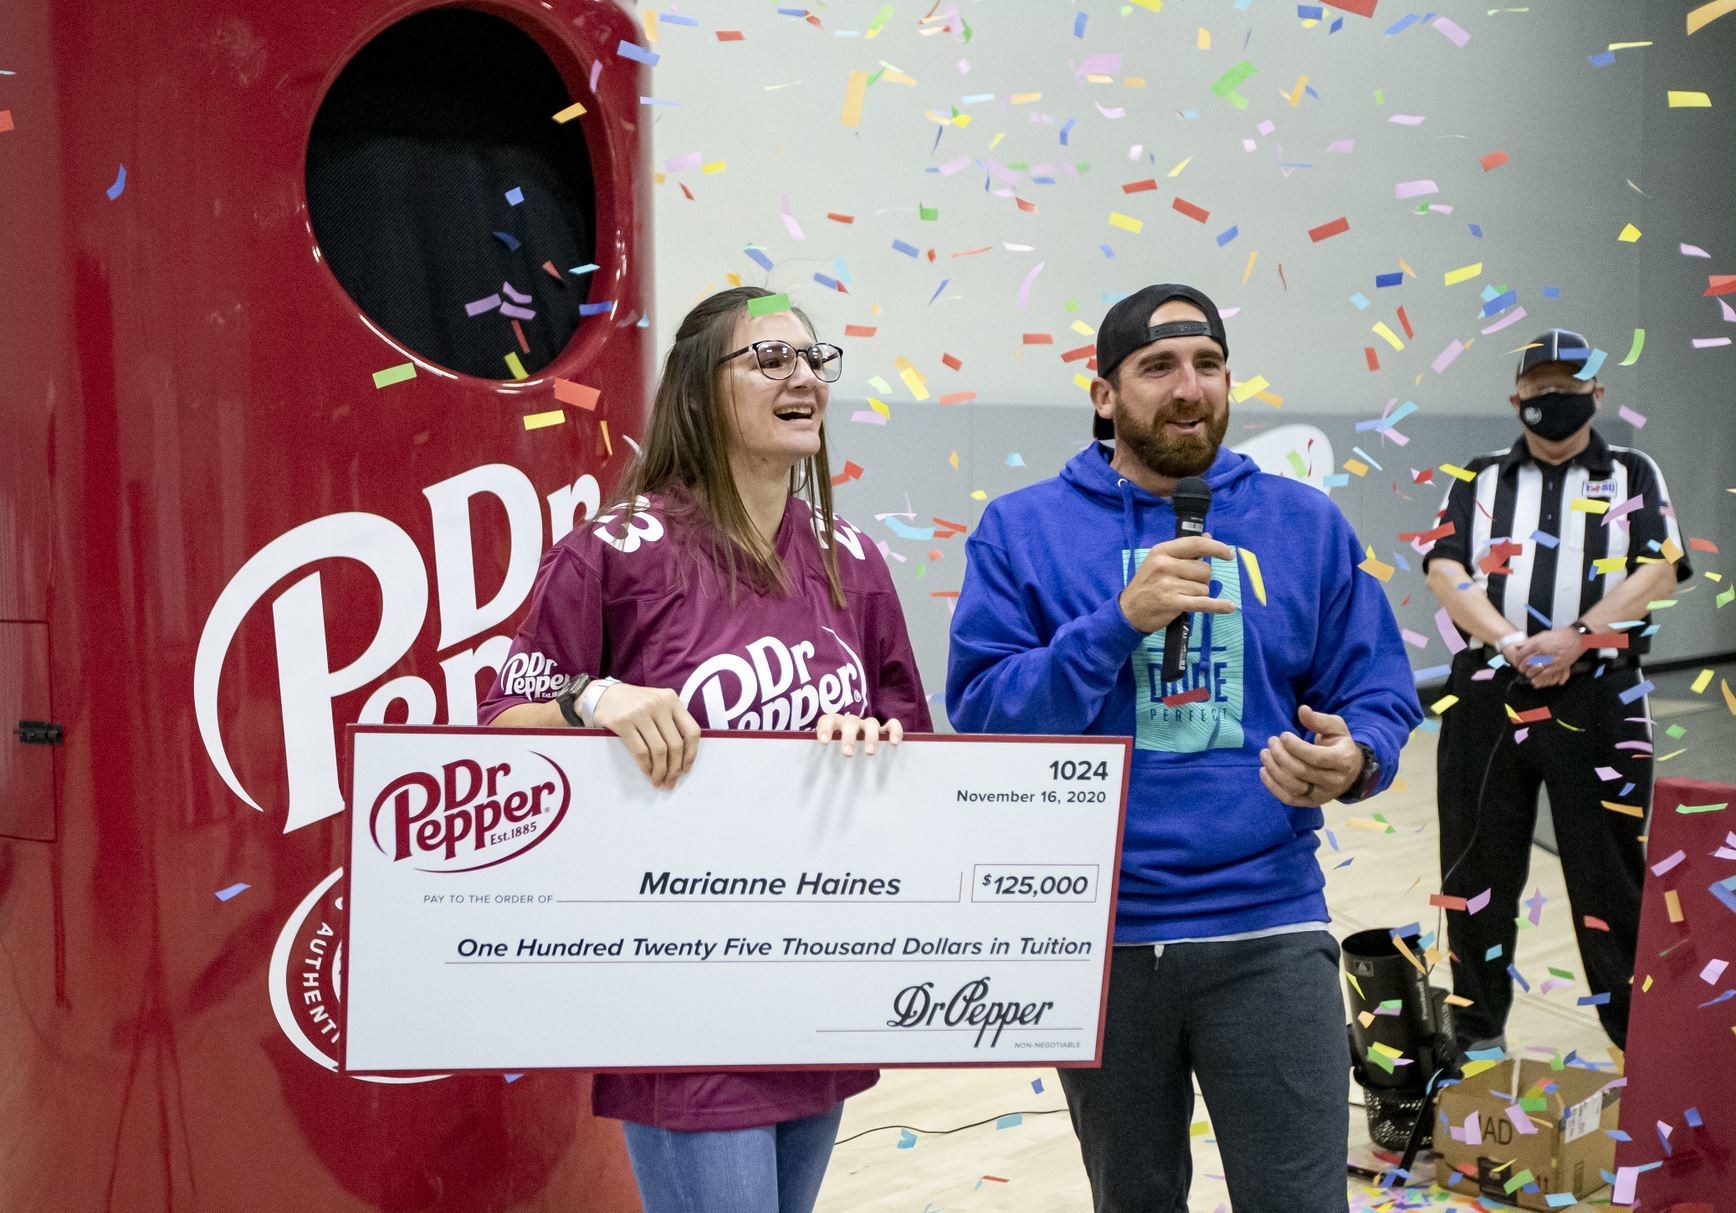 Dr. Pepper $5000 Giveaway